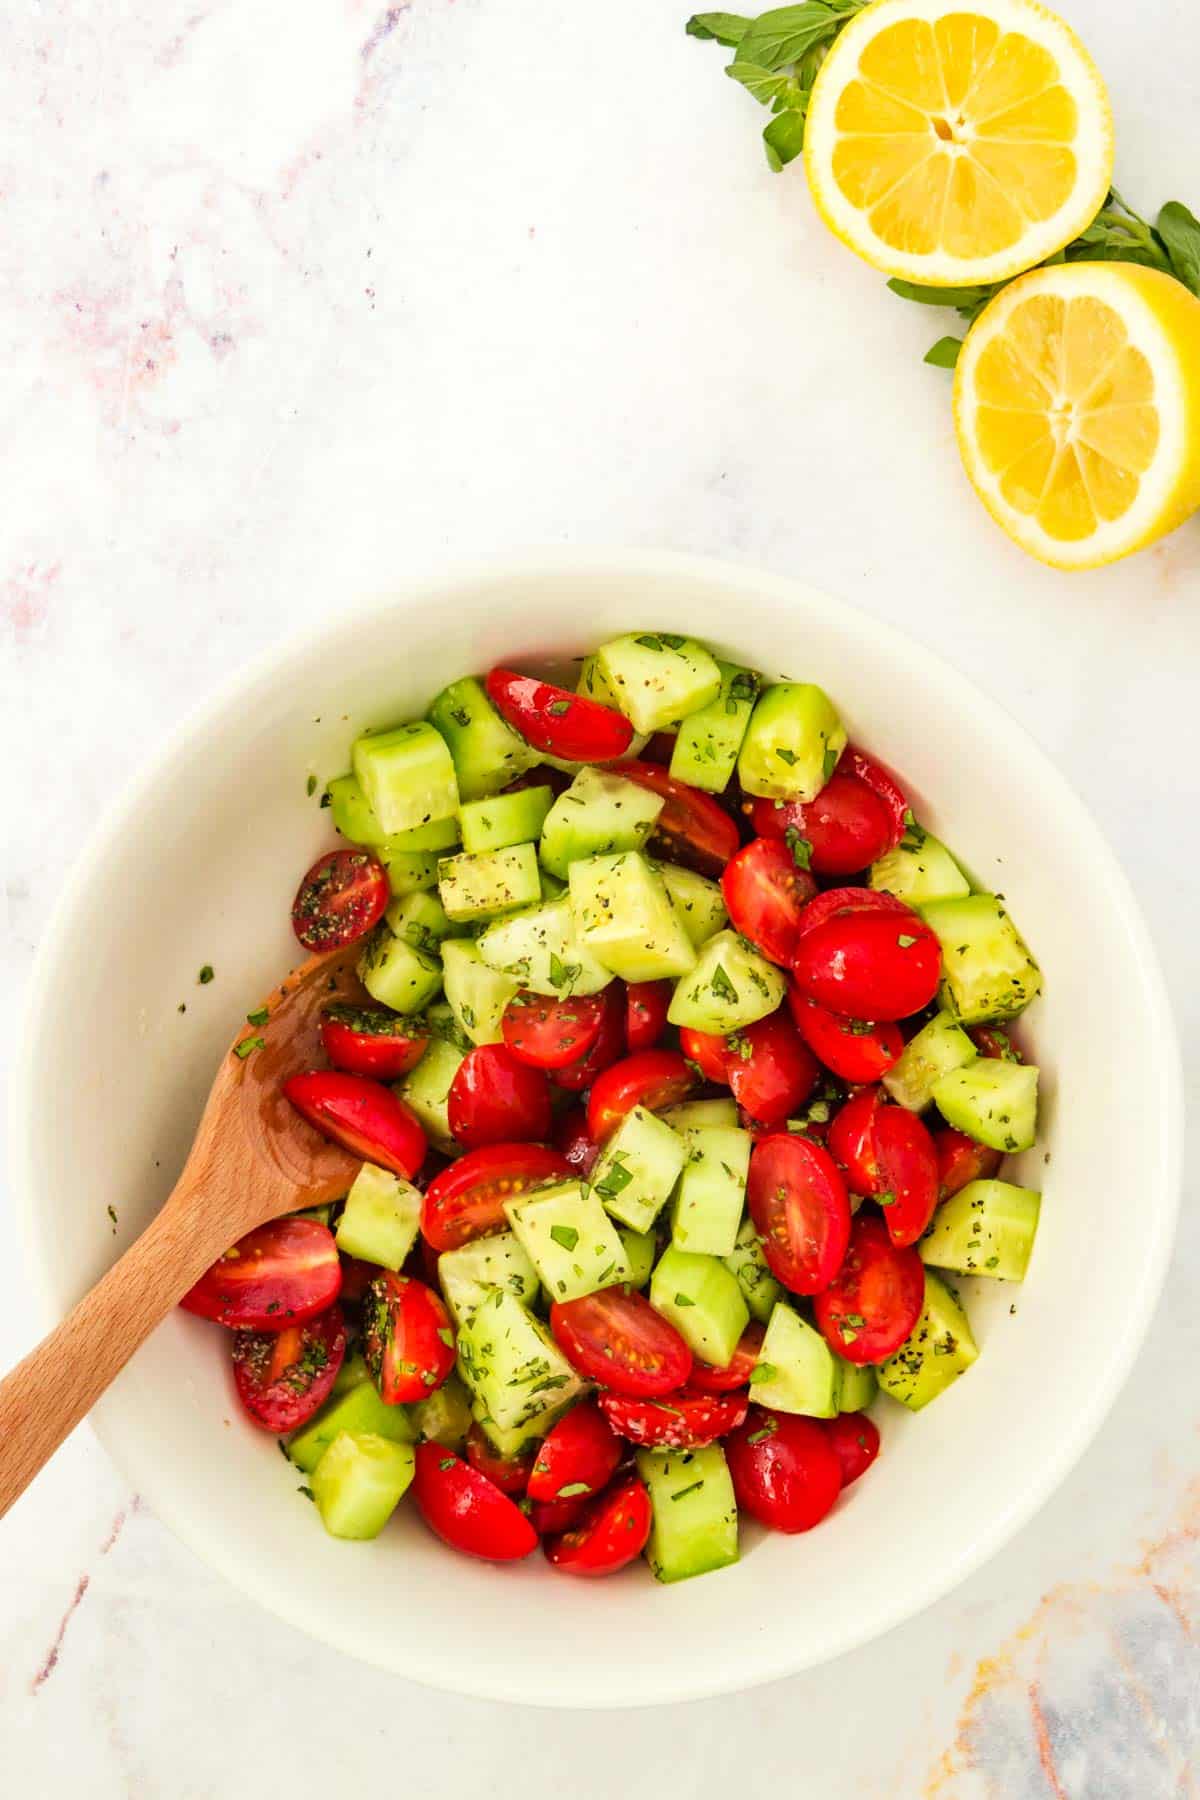 Tomatoes and cucumbers tossed with the dressing in a bowl.